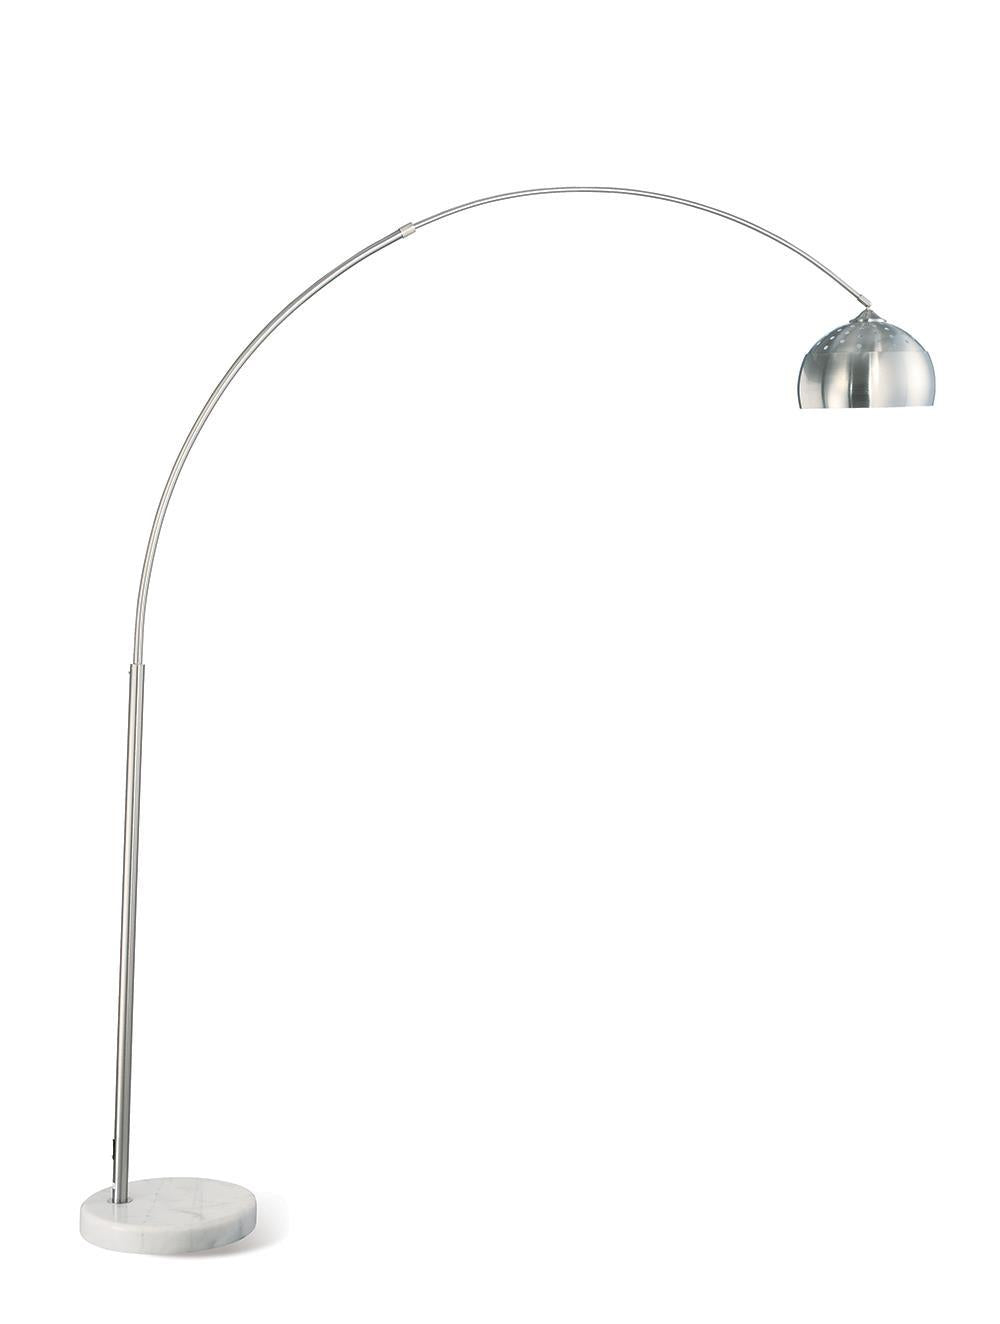 Krester Arched Floor Lamp Brushed Steel and Chrome - Half Price Furniture